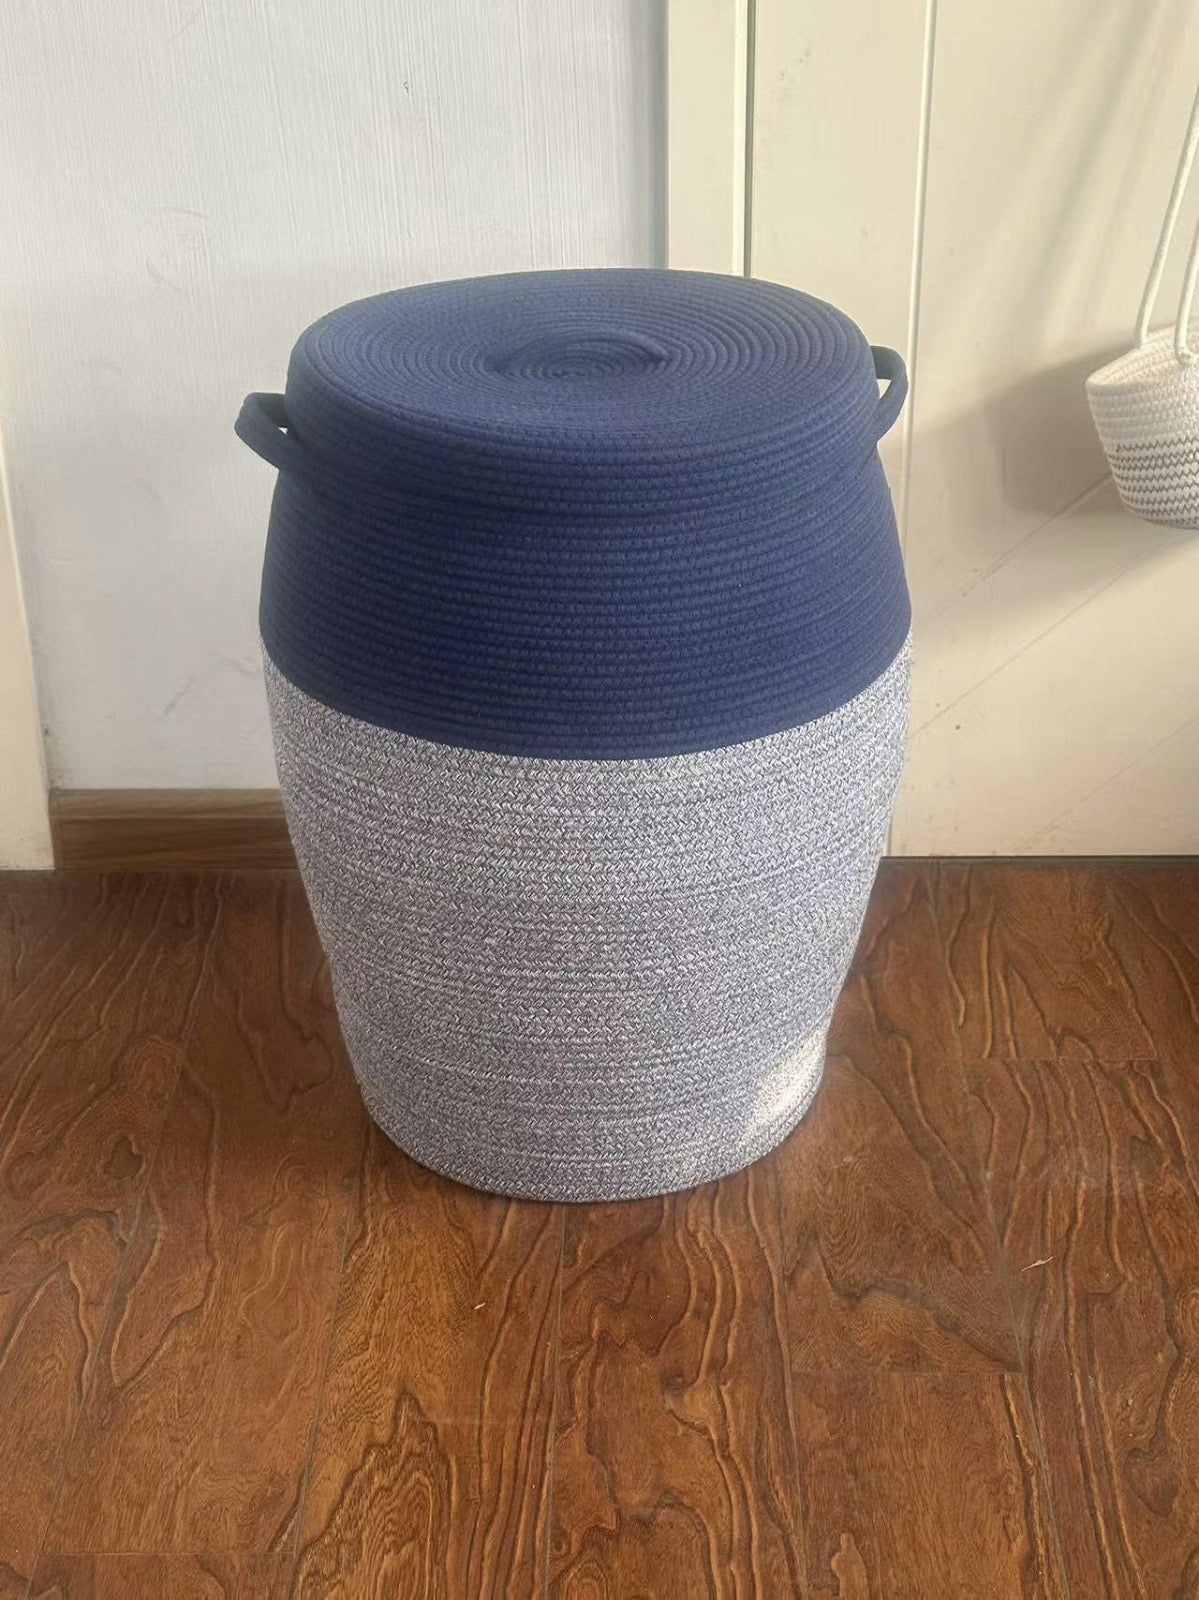 Tall Extra Large Storage Basket with Lid, Cotton Rope Storage Baskets